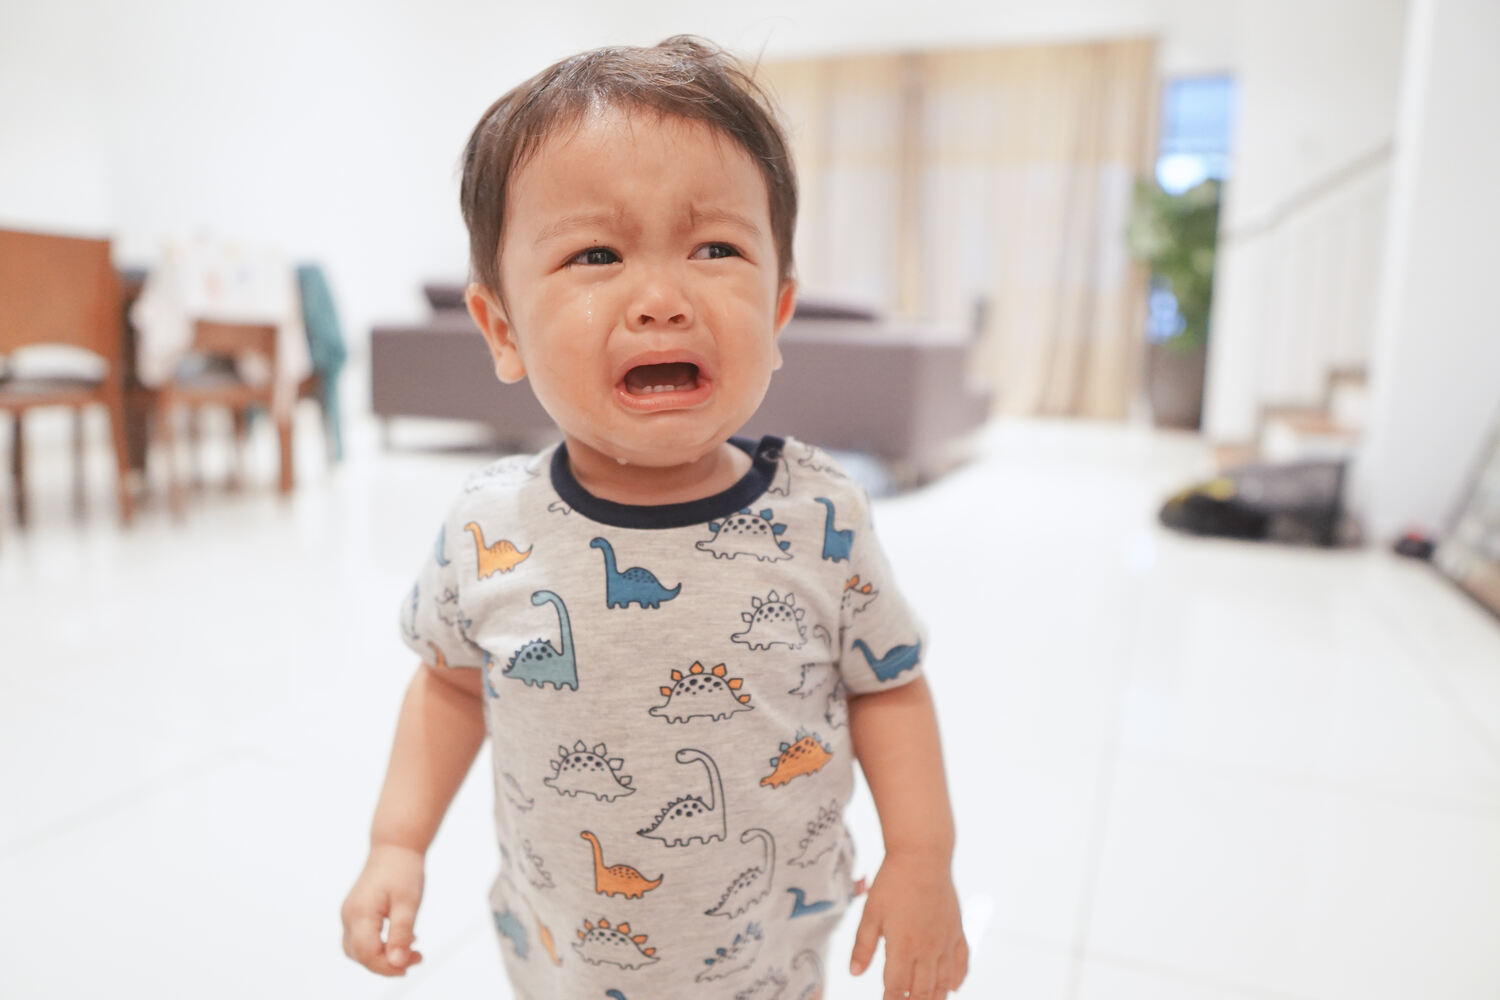 Rushing a toddler can result in meltdowns